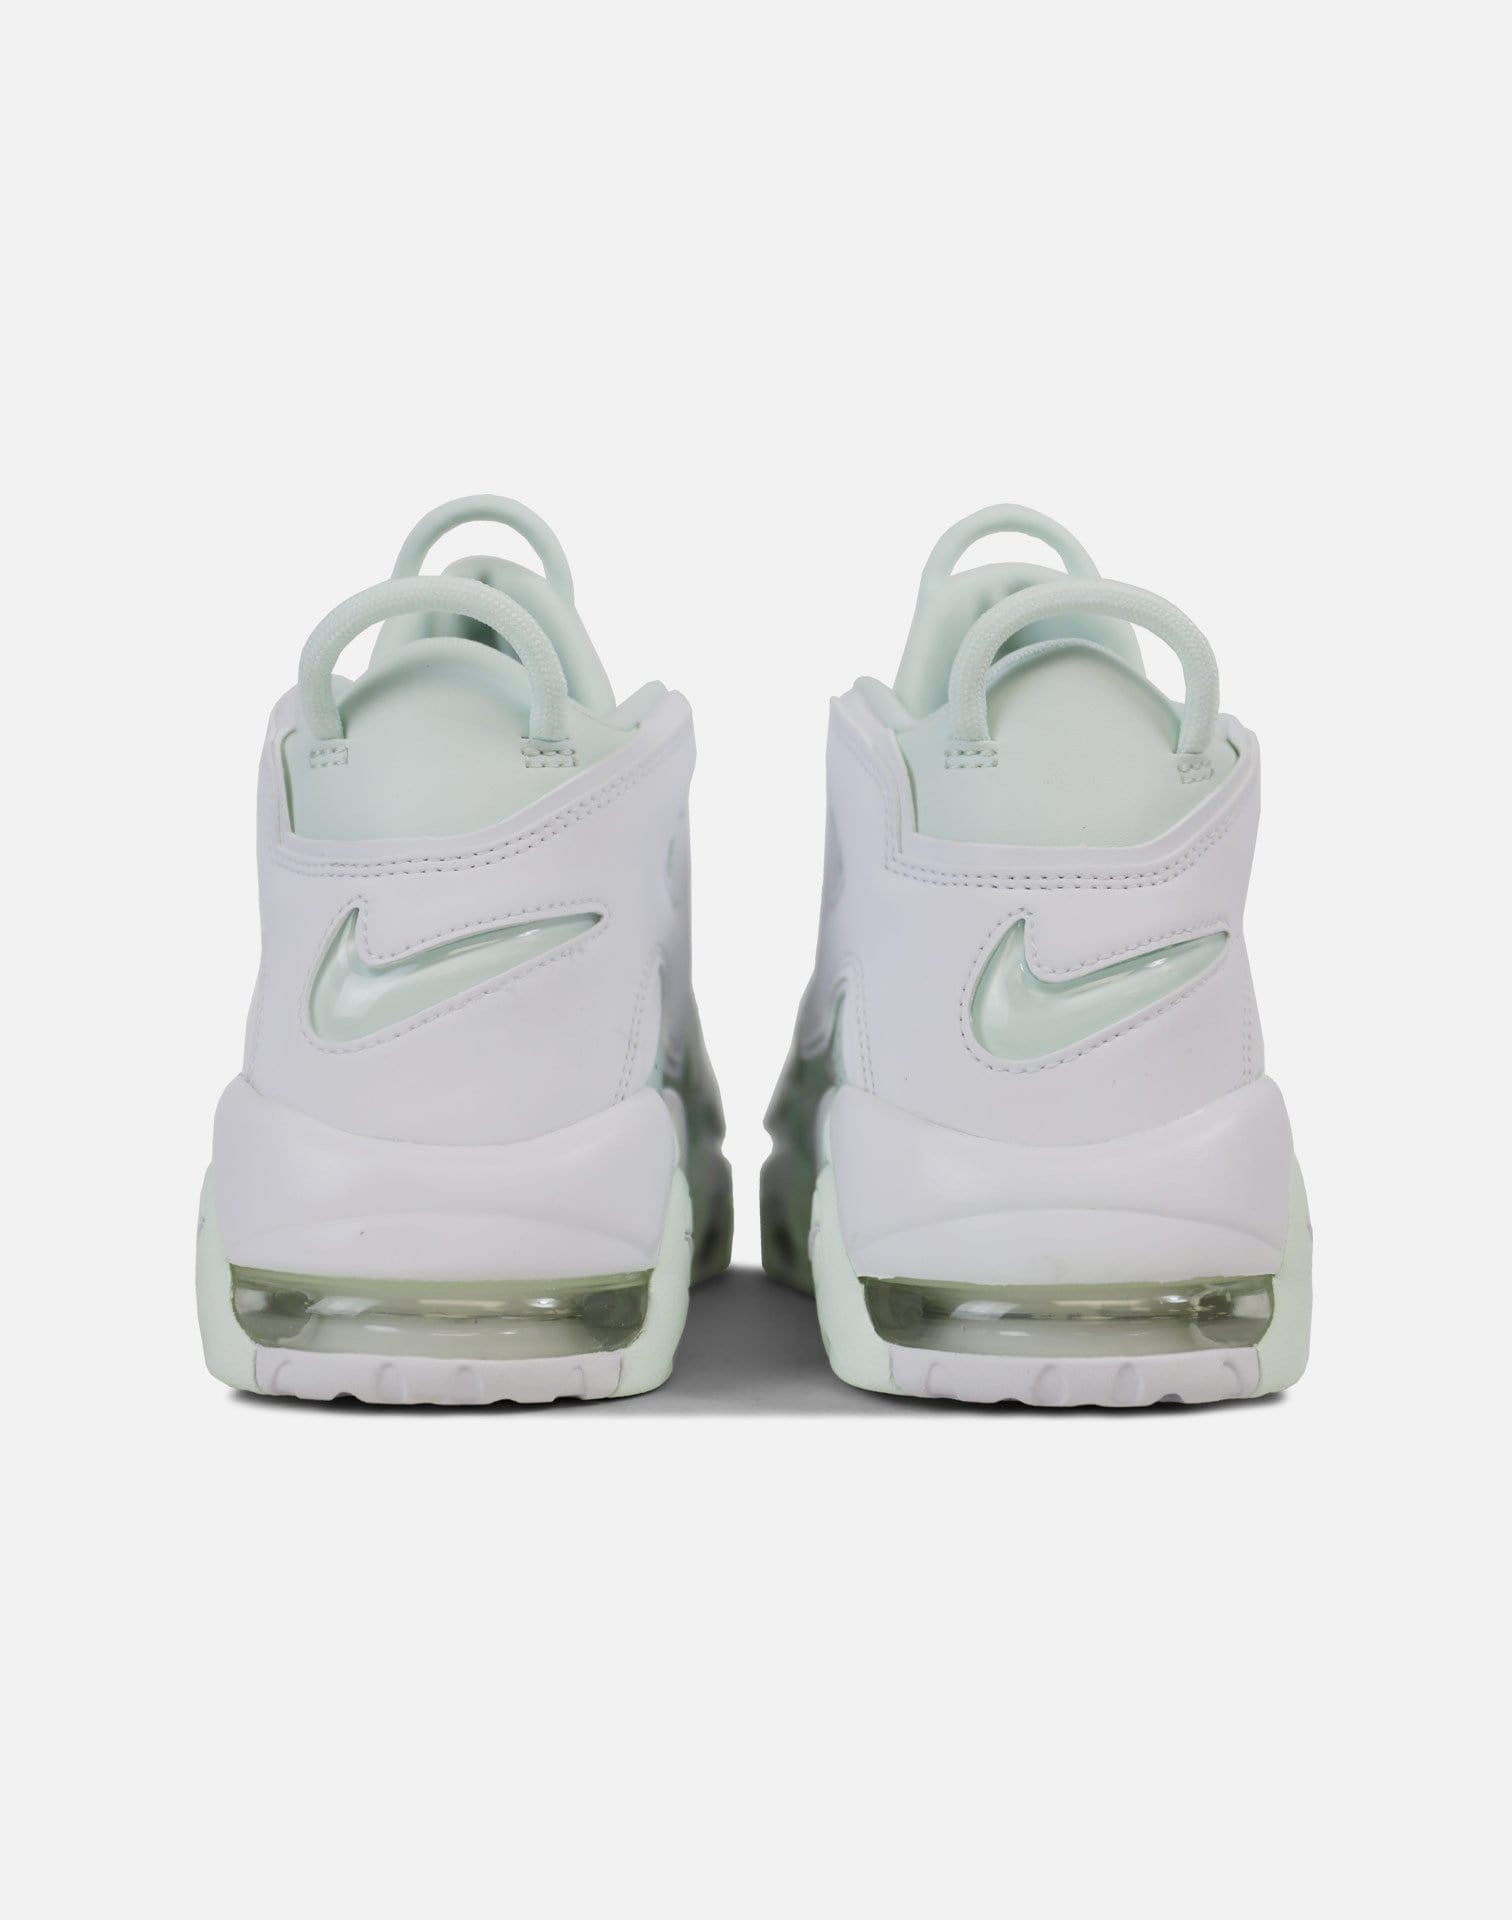 Nike Air More Uptempo 'Sweet, Sweet Mint' (Barely Green/White)